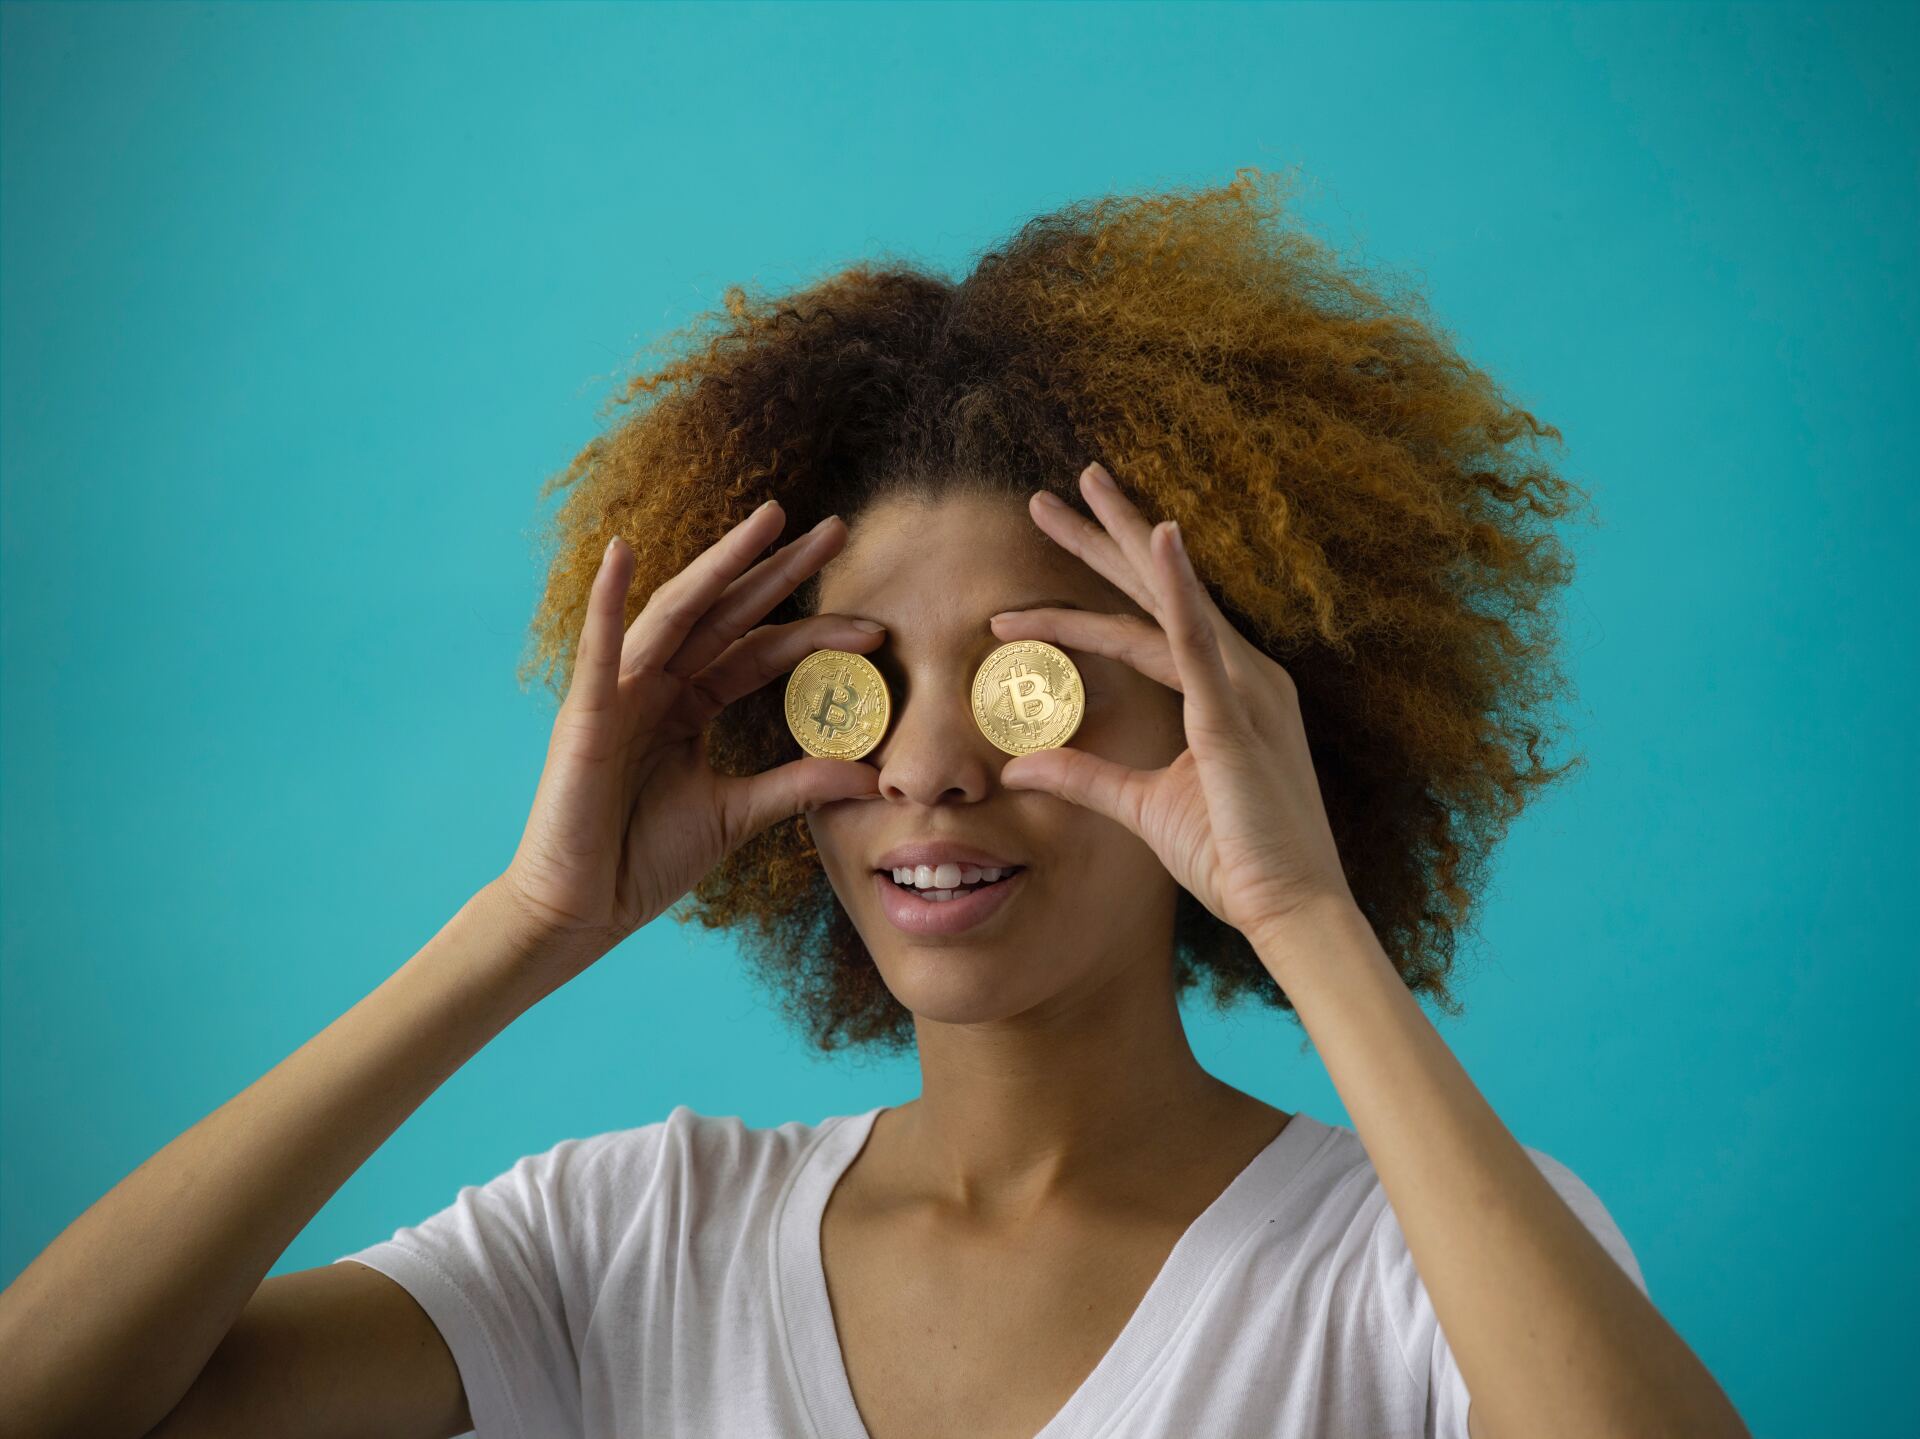 A lady is holding two BitCoin physical coins up against her eyes to show that she is looking for something